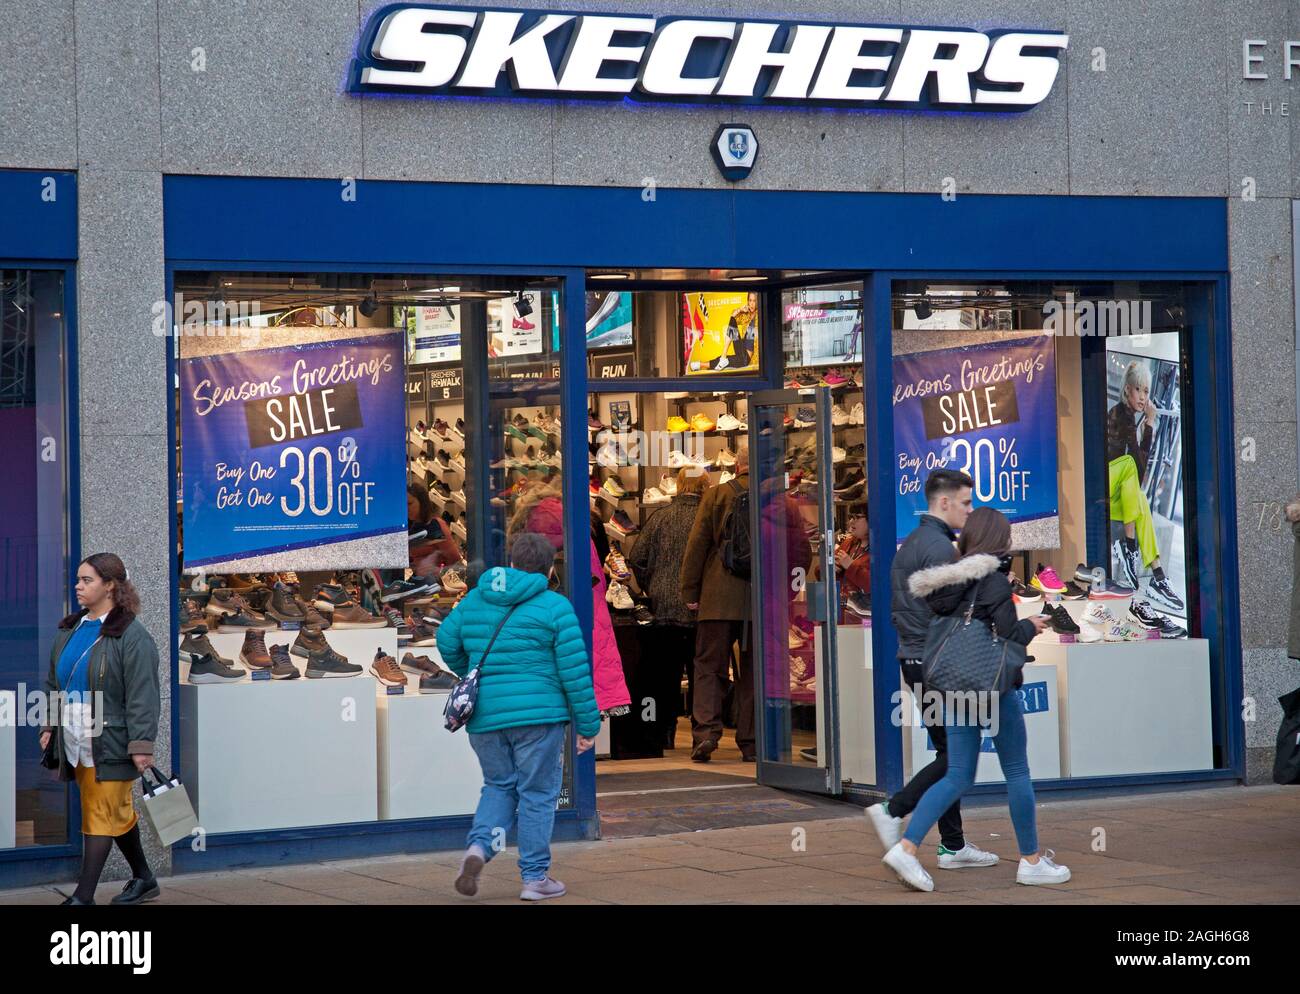 Skechers Stores High Resolution Stock 